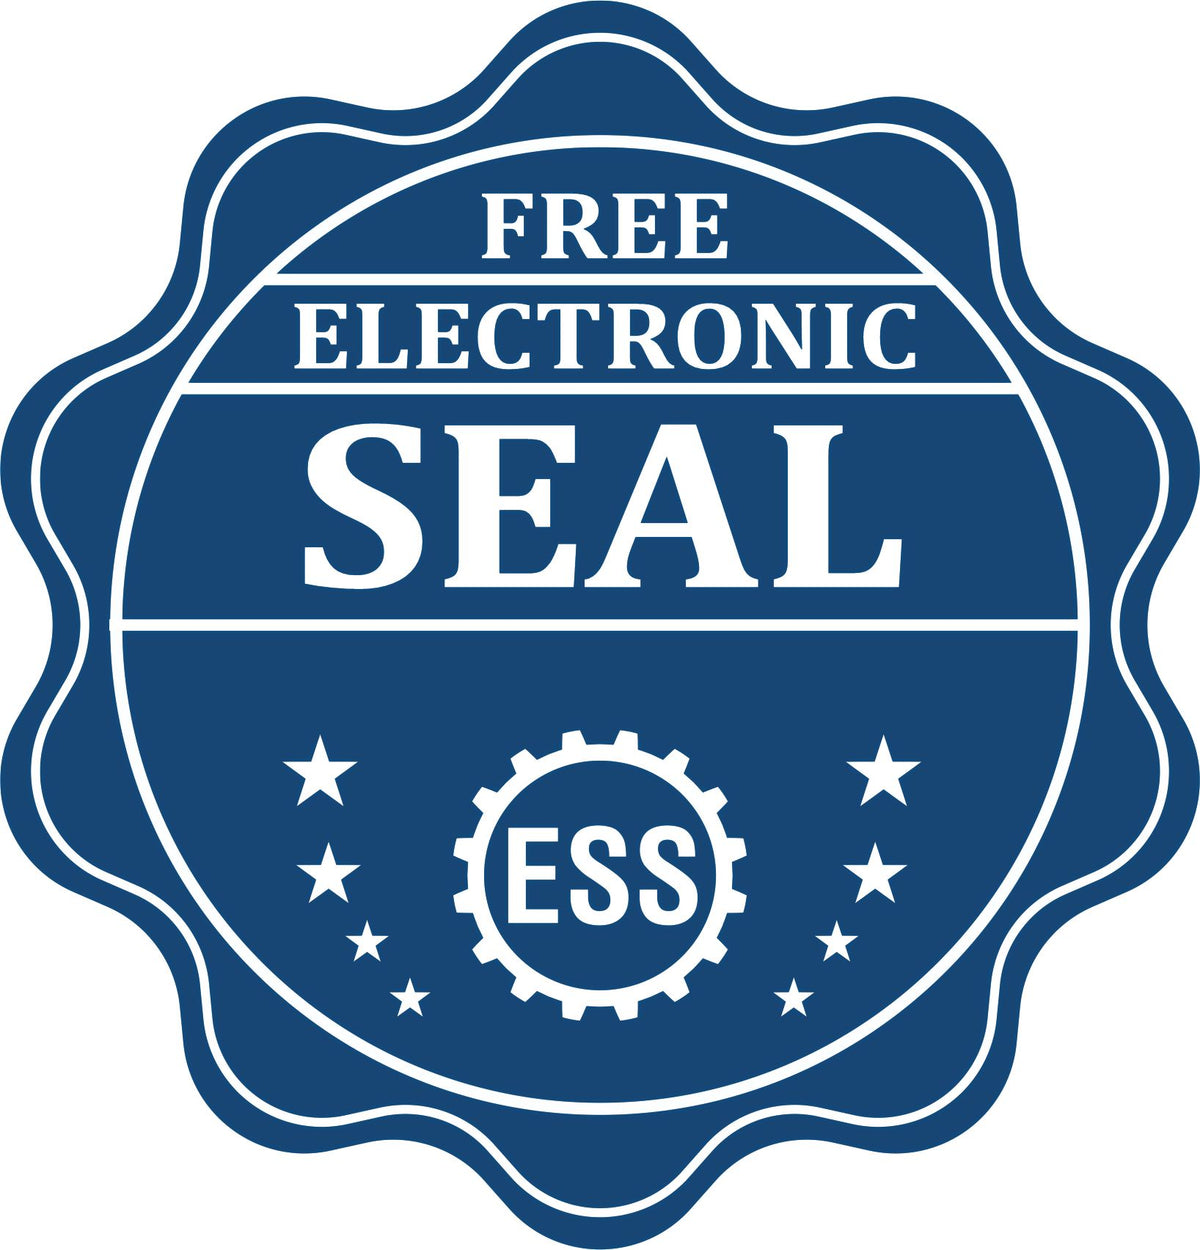 A badge showing a free electronic seal for the Long Reach California PE Seal with stars and the ESS gear on the emblem.